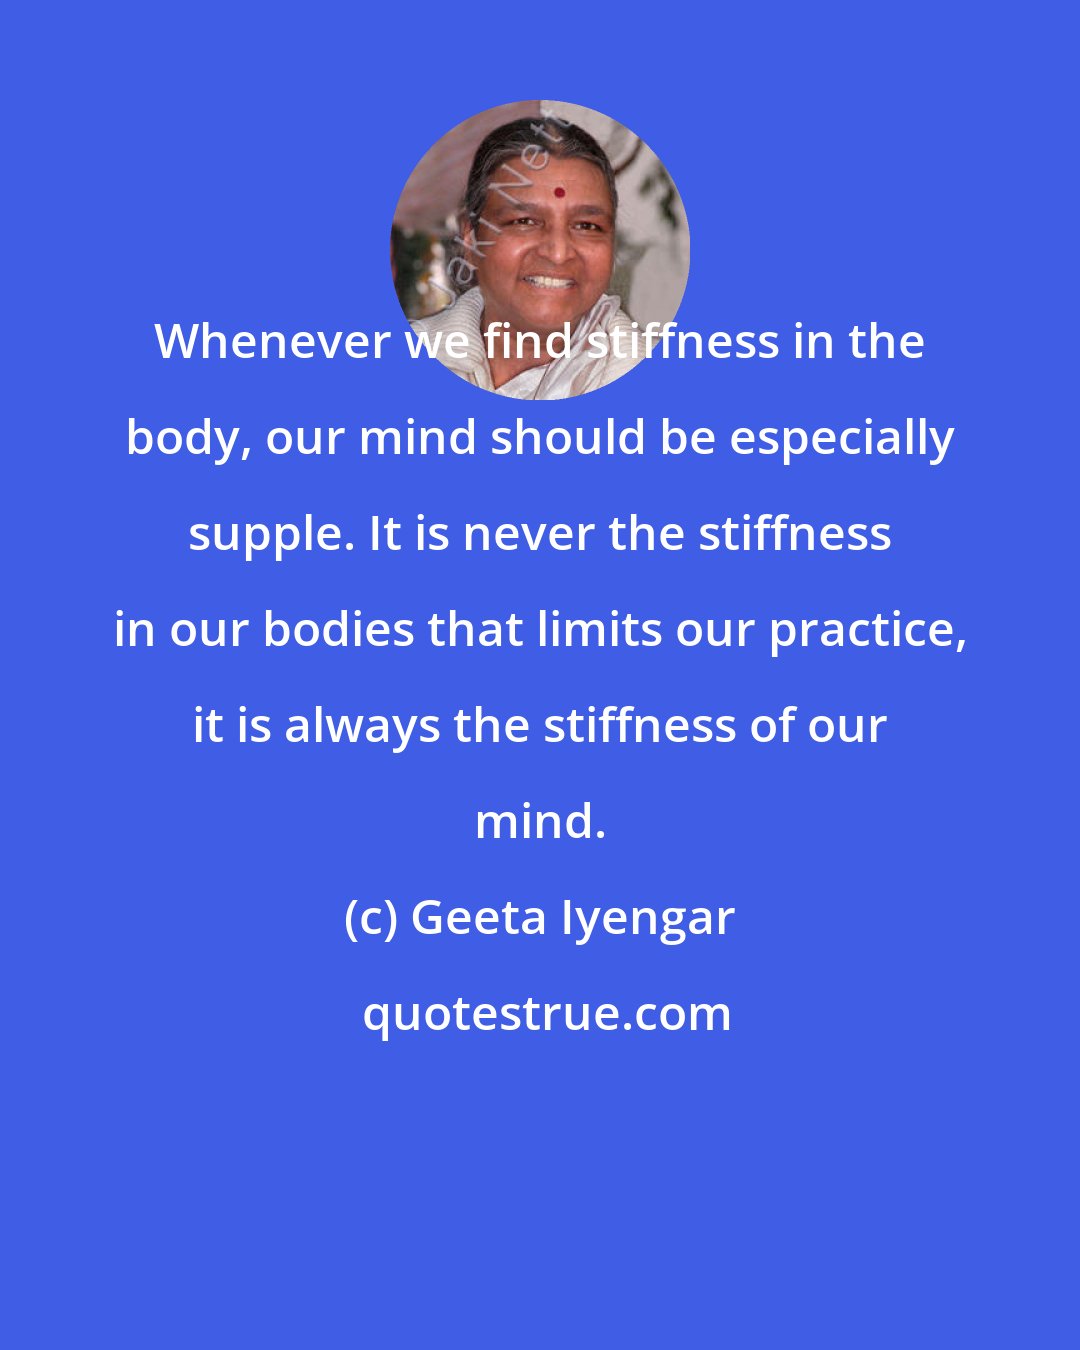 Geeta Iyengar: Whenever we find stiffness in the body, our mind should be especially supple. It is never the stiffness in our bodies that limits our practice, it is always the stiffness of our mind.